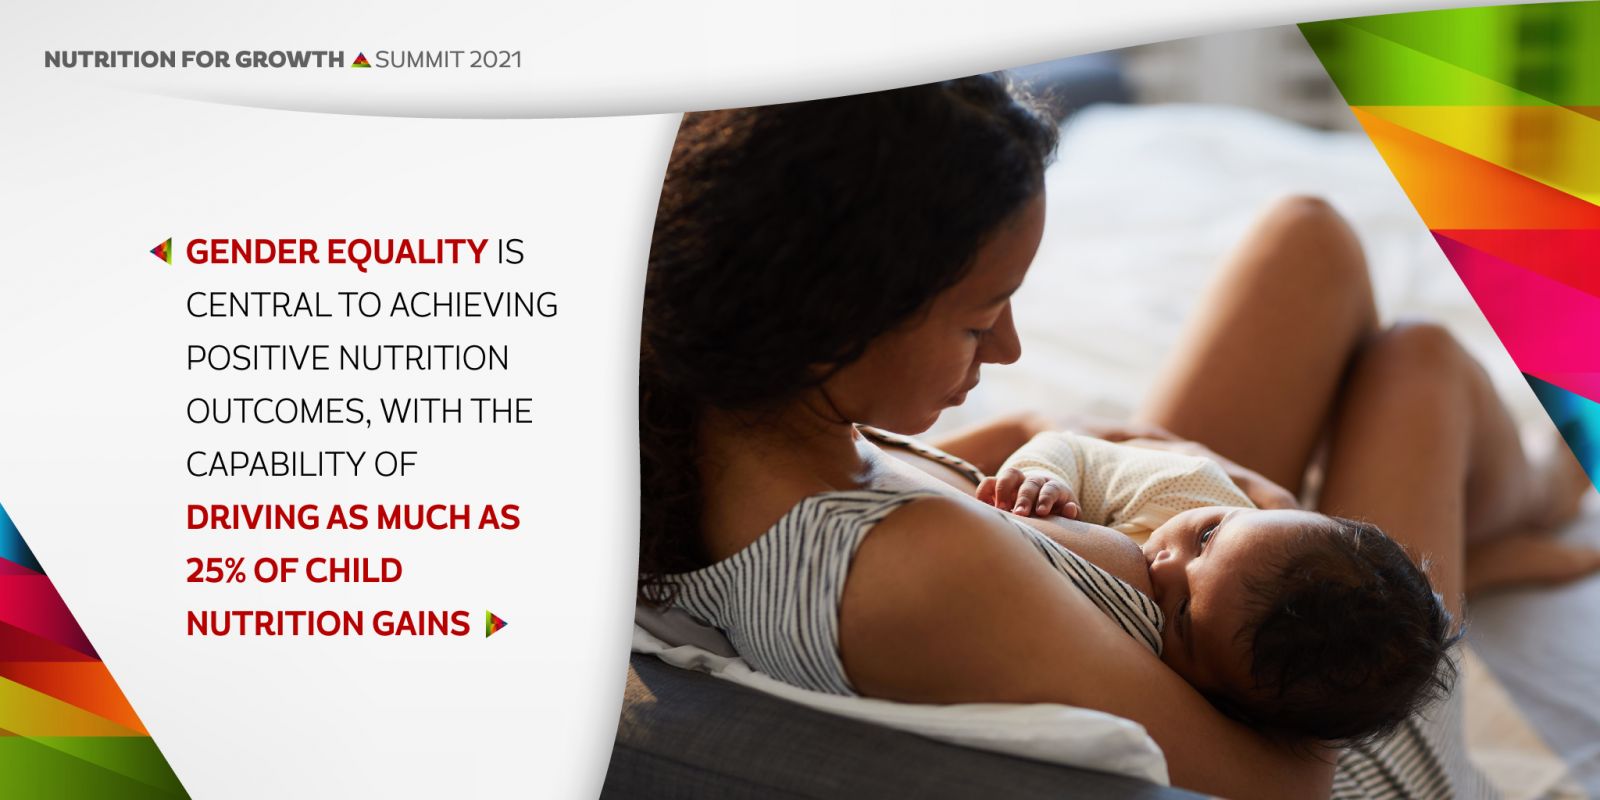  Nutrition for growth summit 2021  Left hand side text: Gender equality is central to achieving positive nutrition outcomes, with the capability of driving as much as 25% of child nutrition Gaines Right hand image: woman breastfeeding a baby